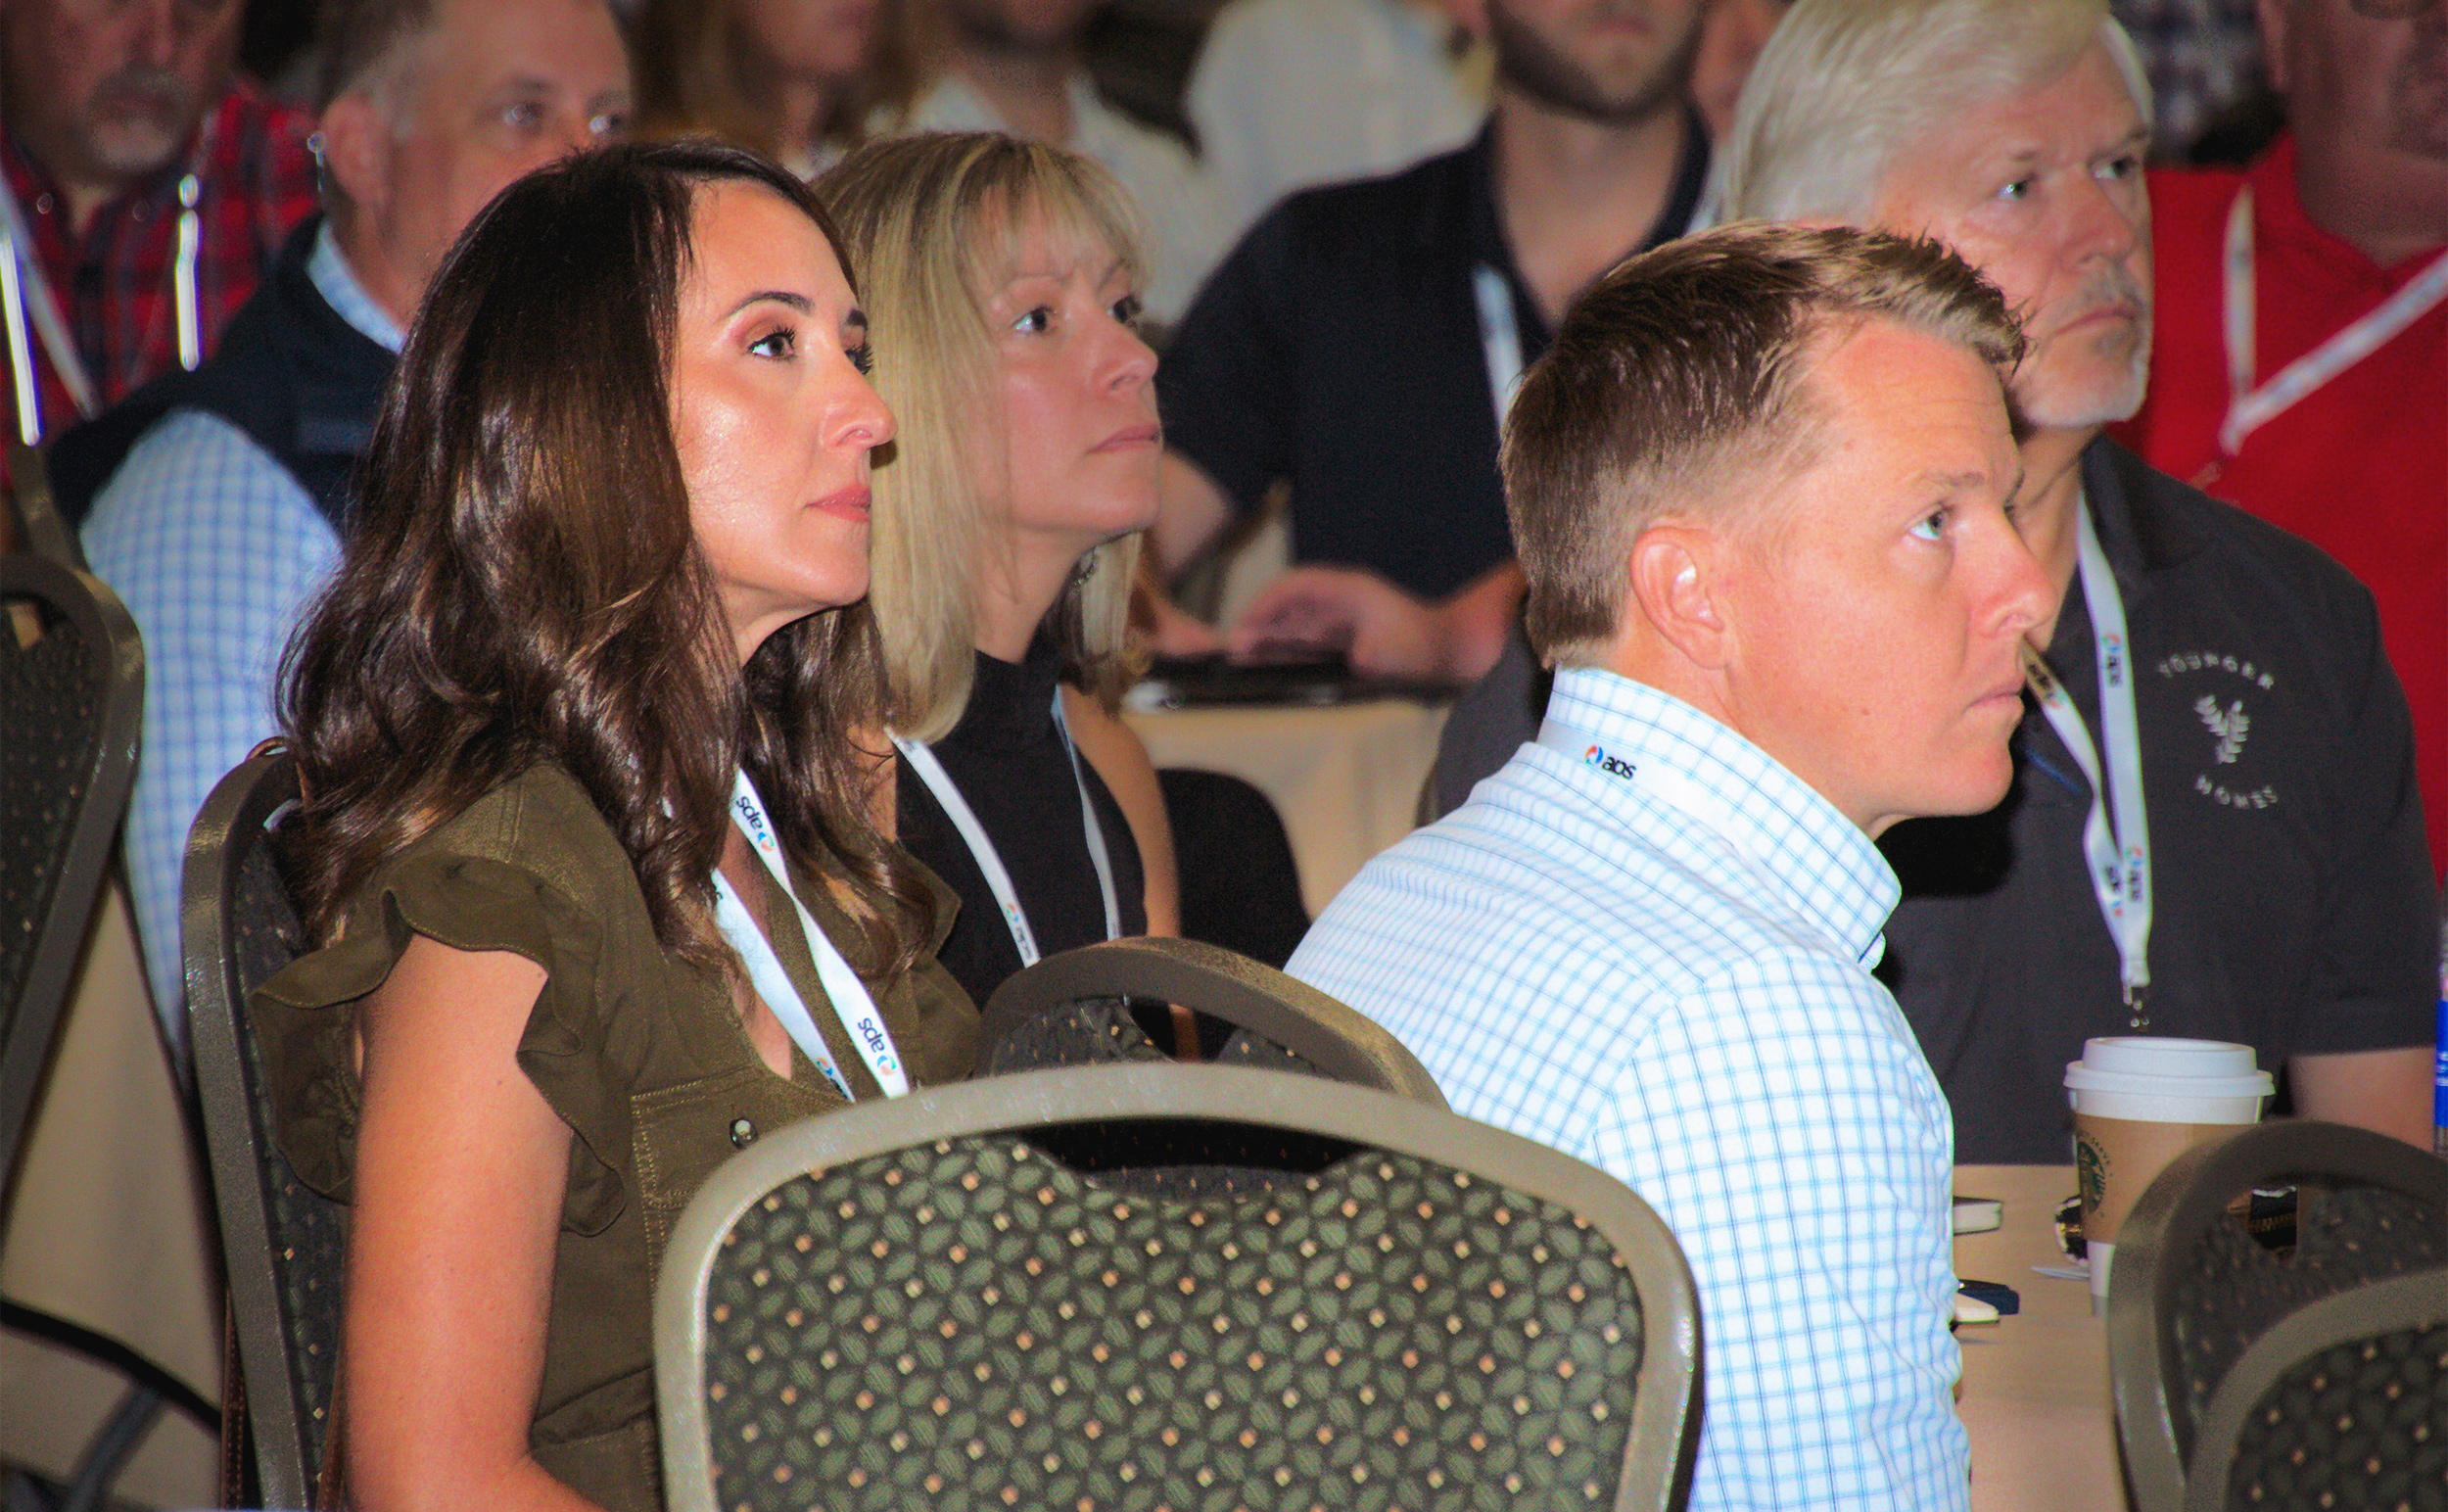 Danielle and Jesse Younger listening to presentation in crowded room